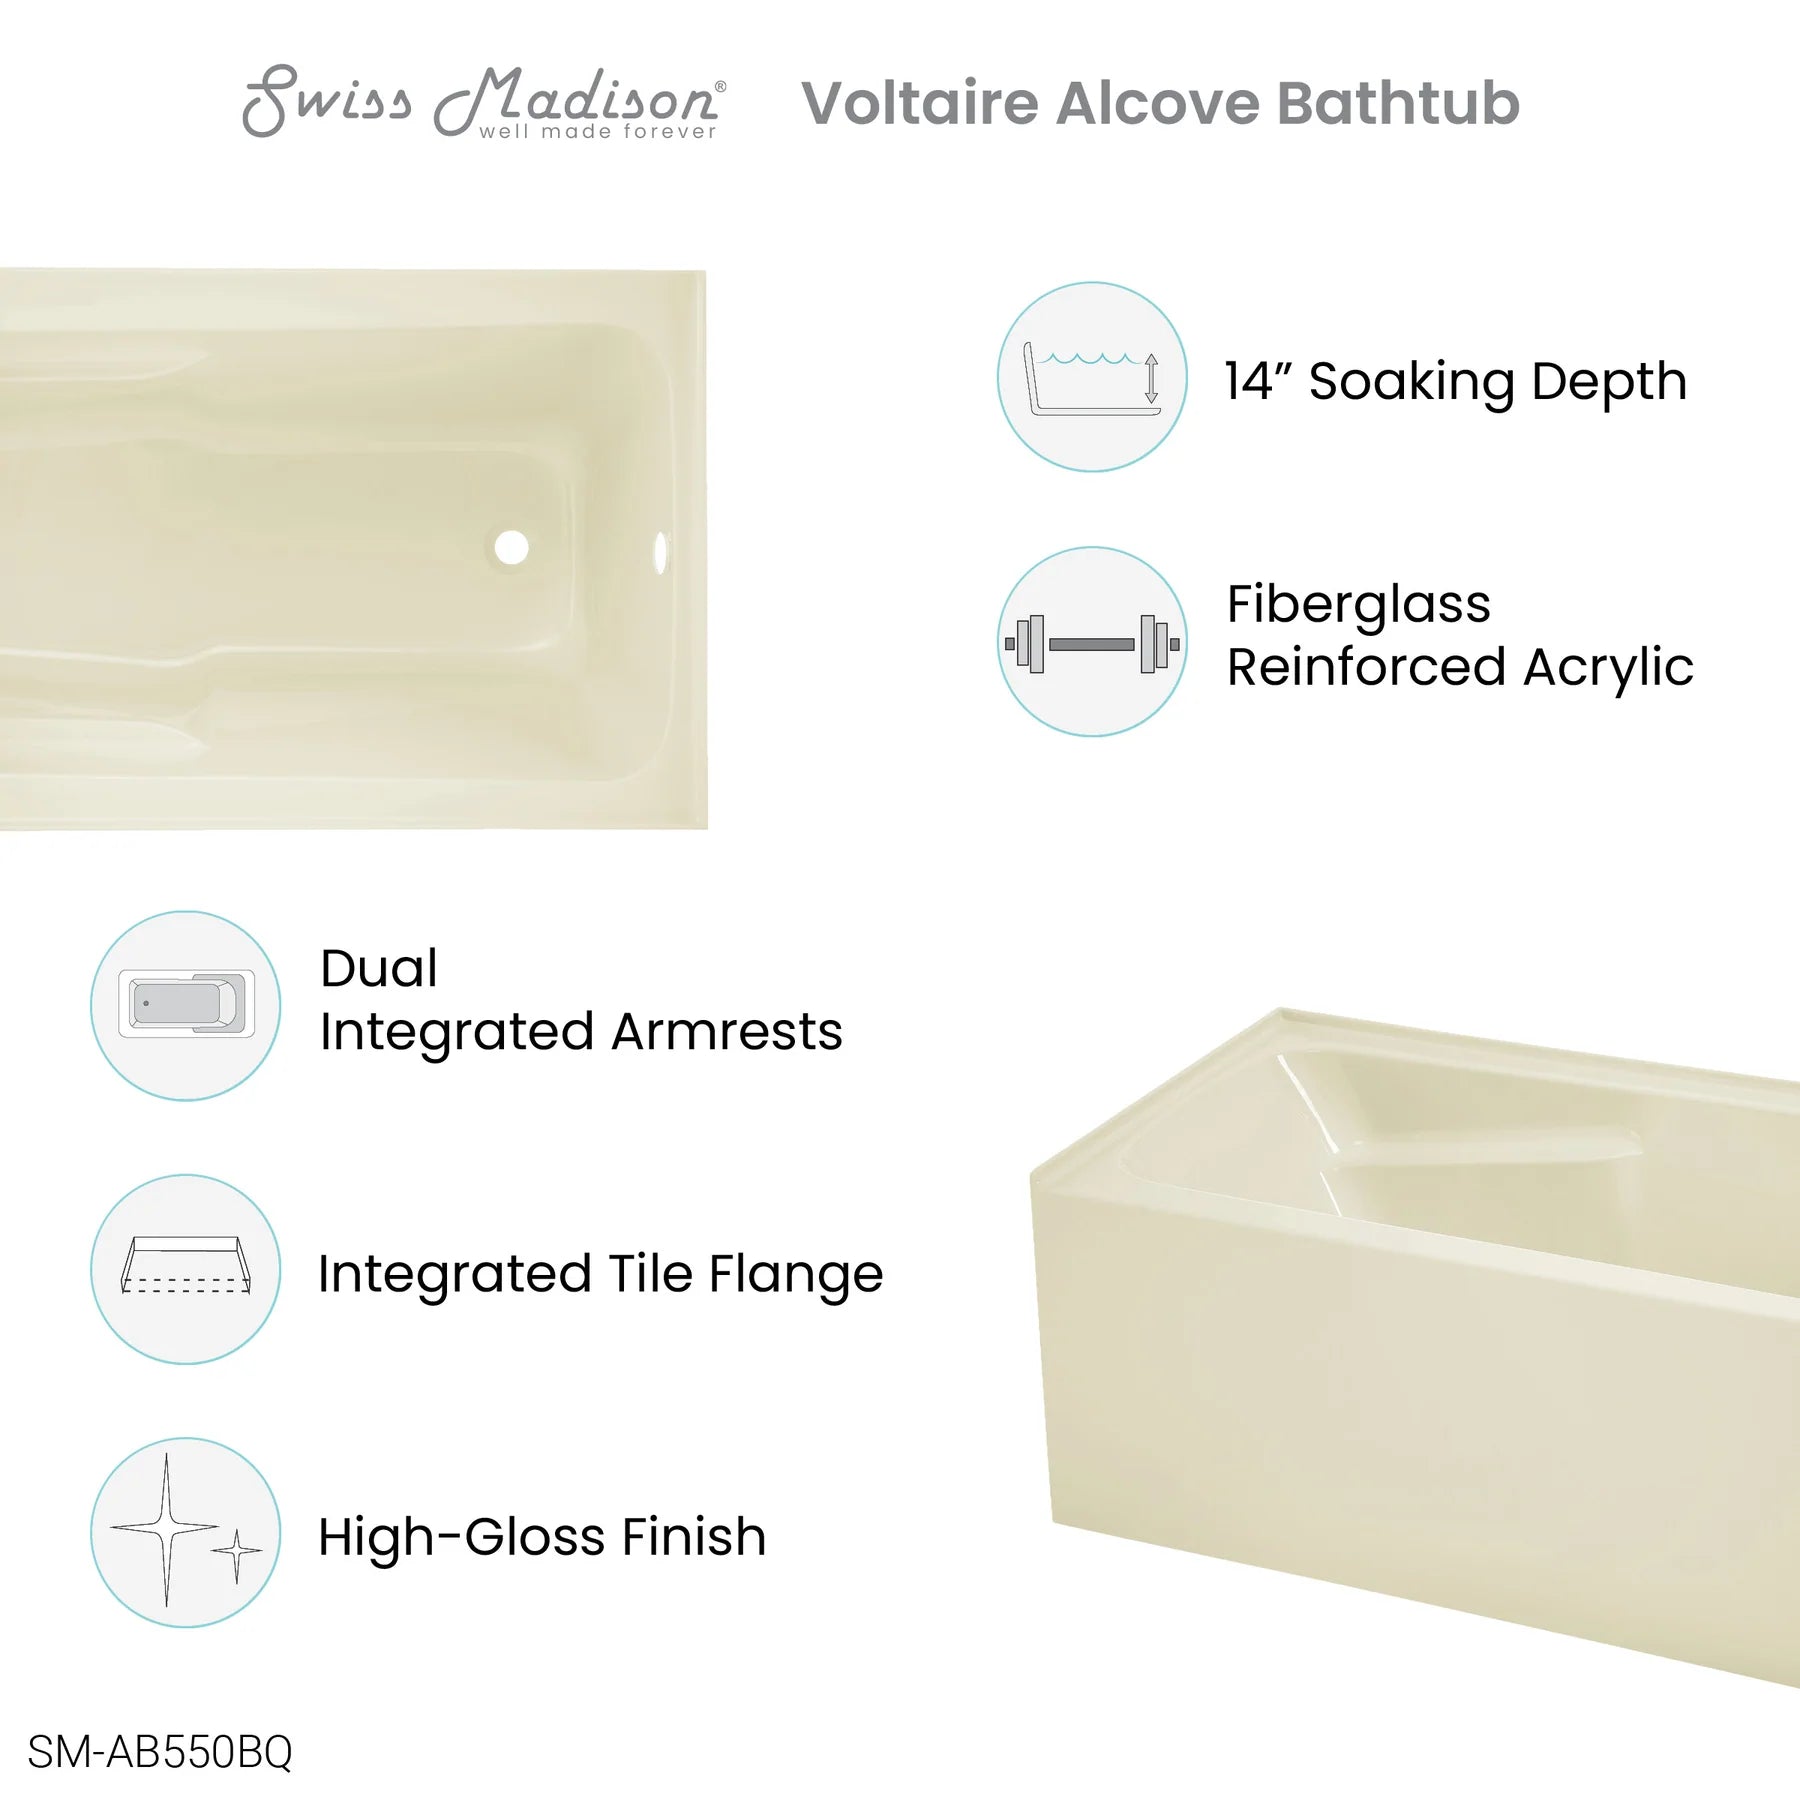 Swiss Madison Voltaire 54" X 30" Right-Hand Drain Alcove Bathtub with Apron in Bisque - SM-AB550BQ